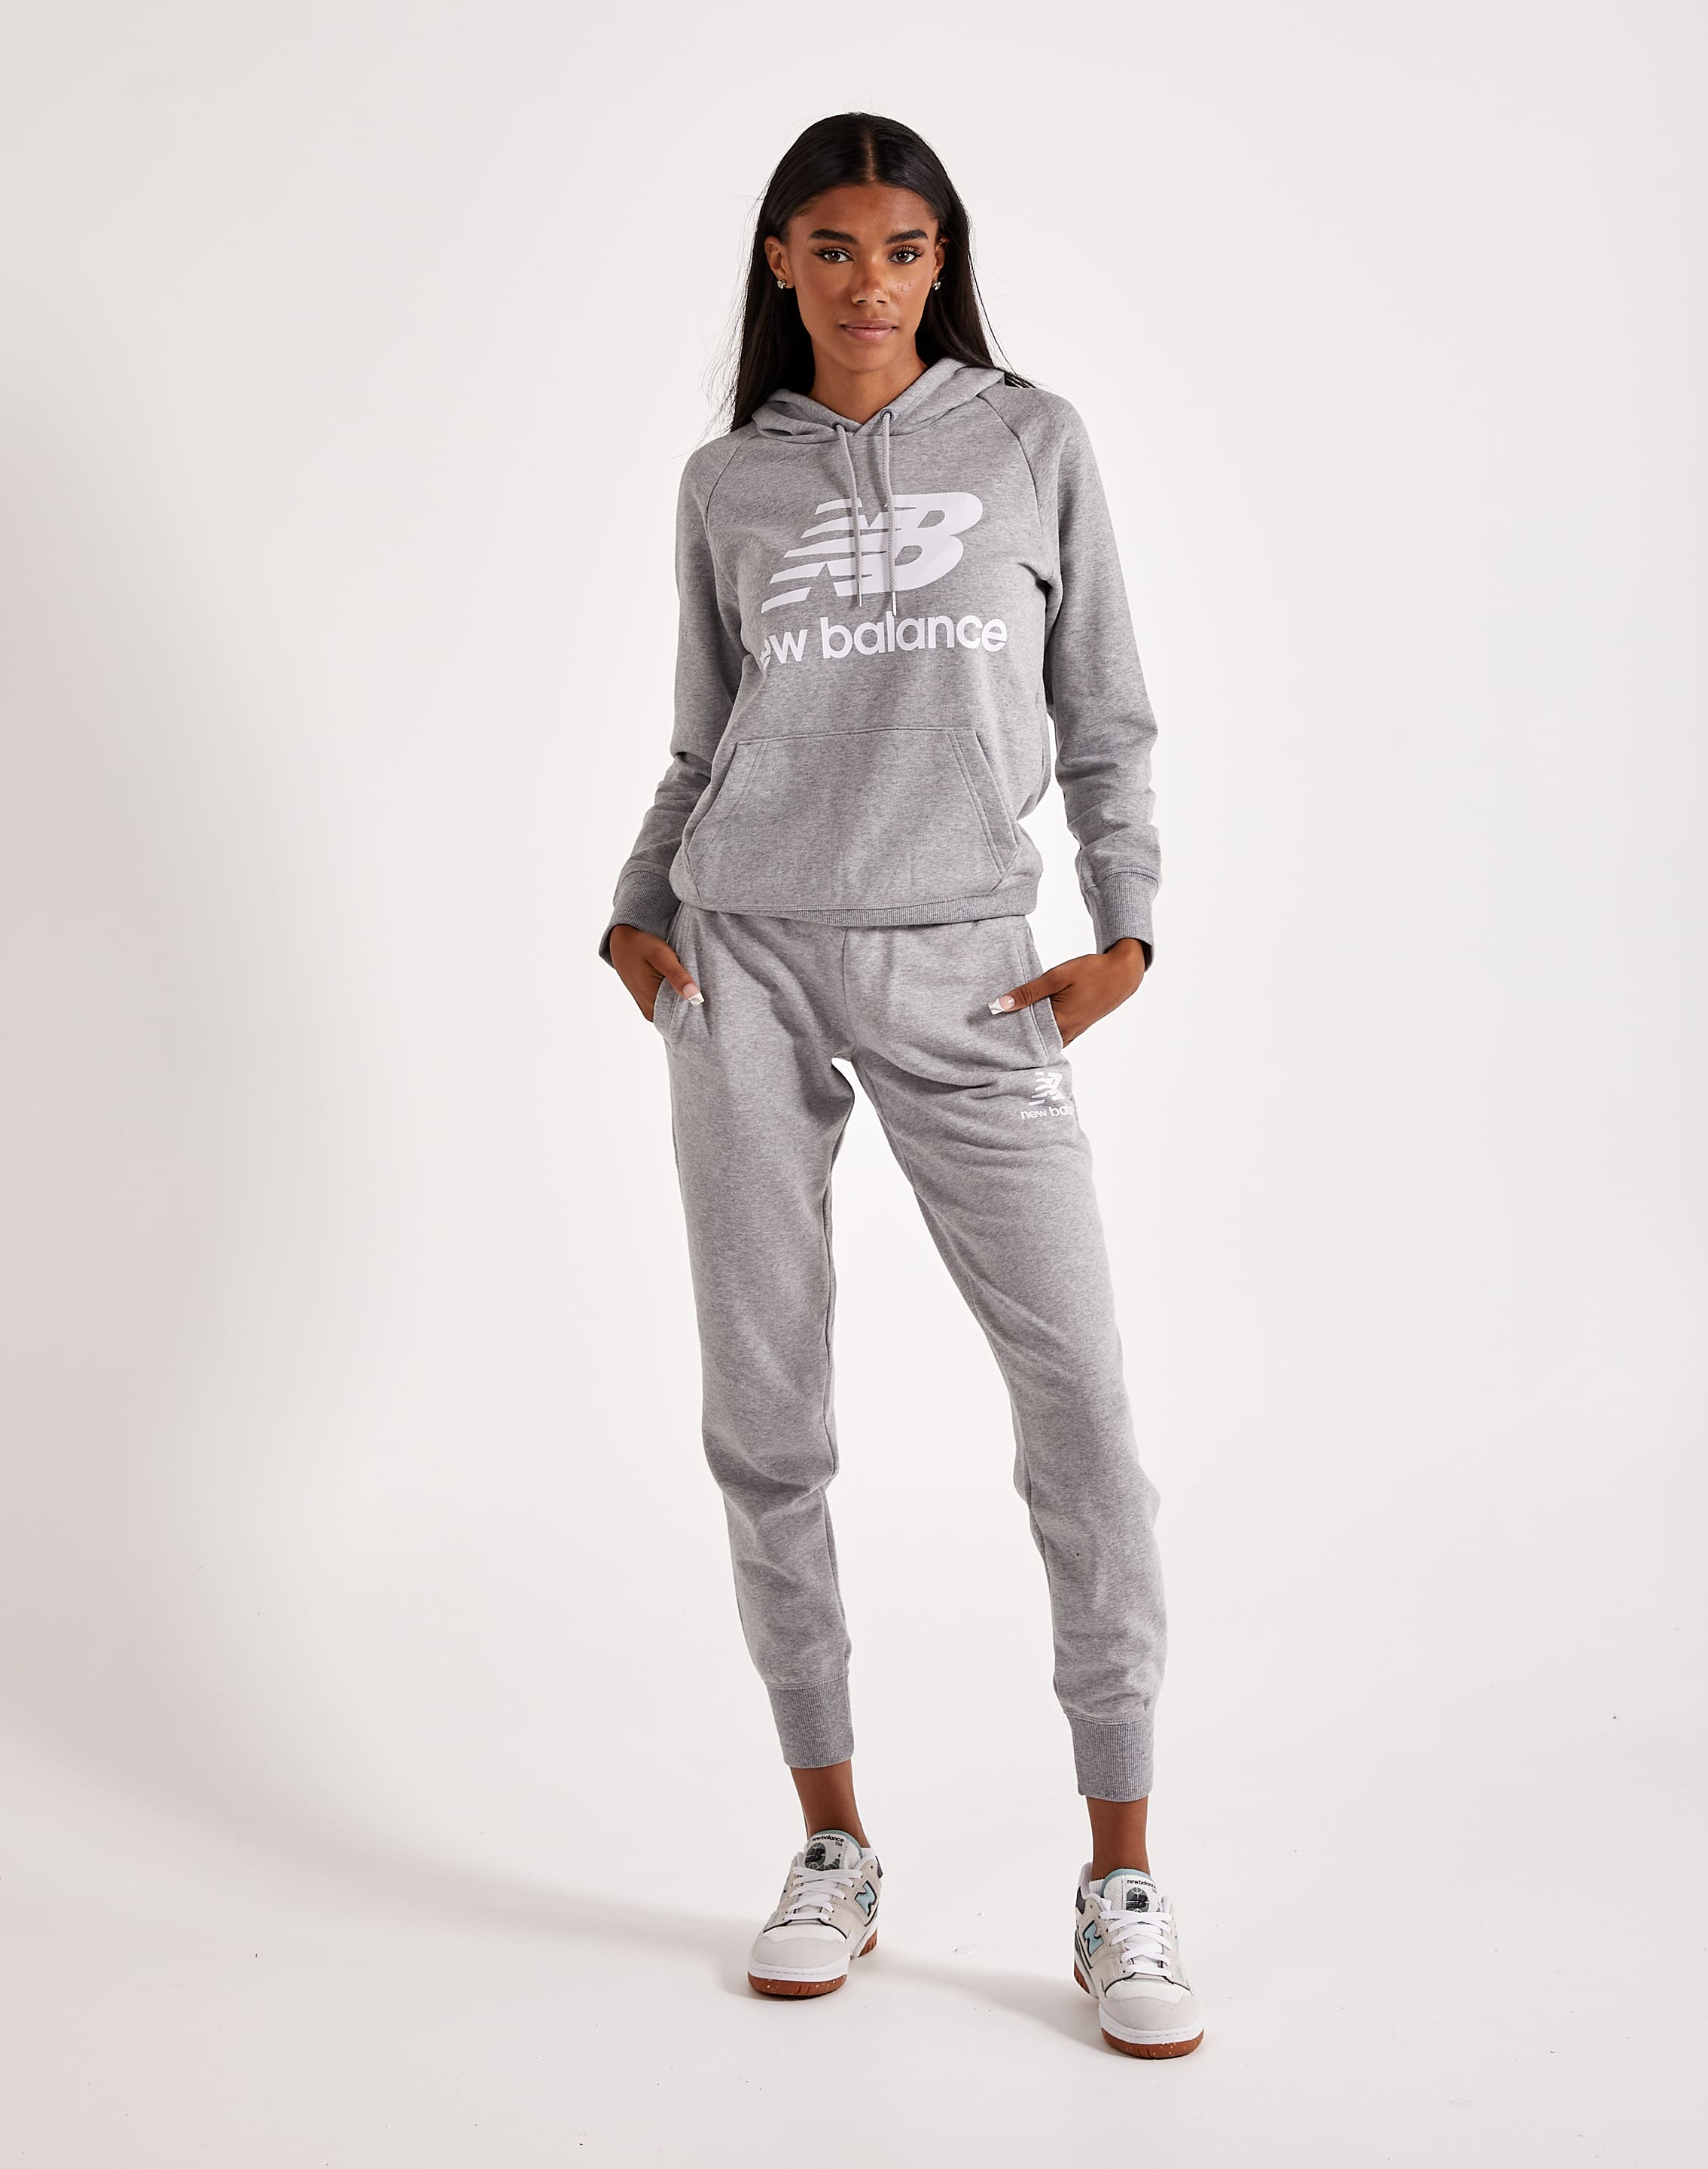 New Balance Clothing Collection for Women